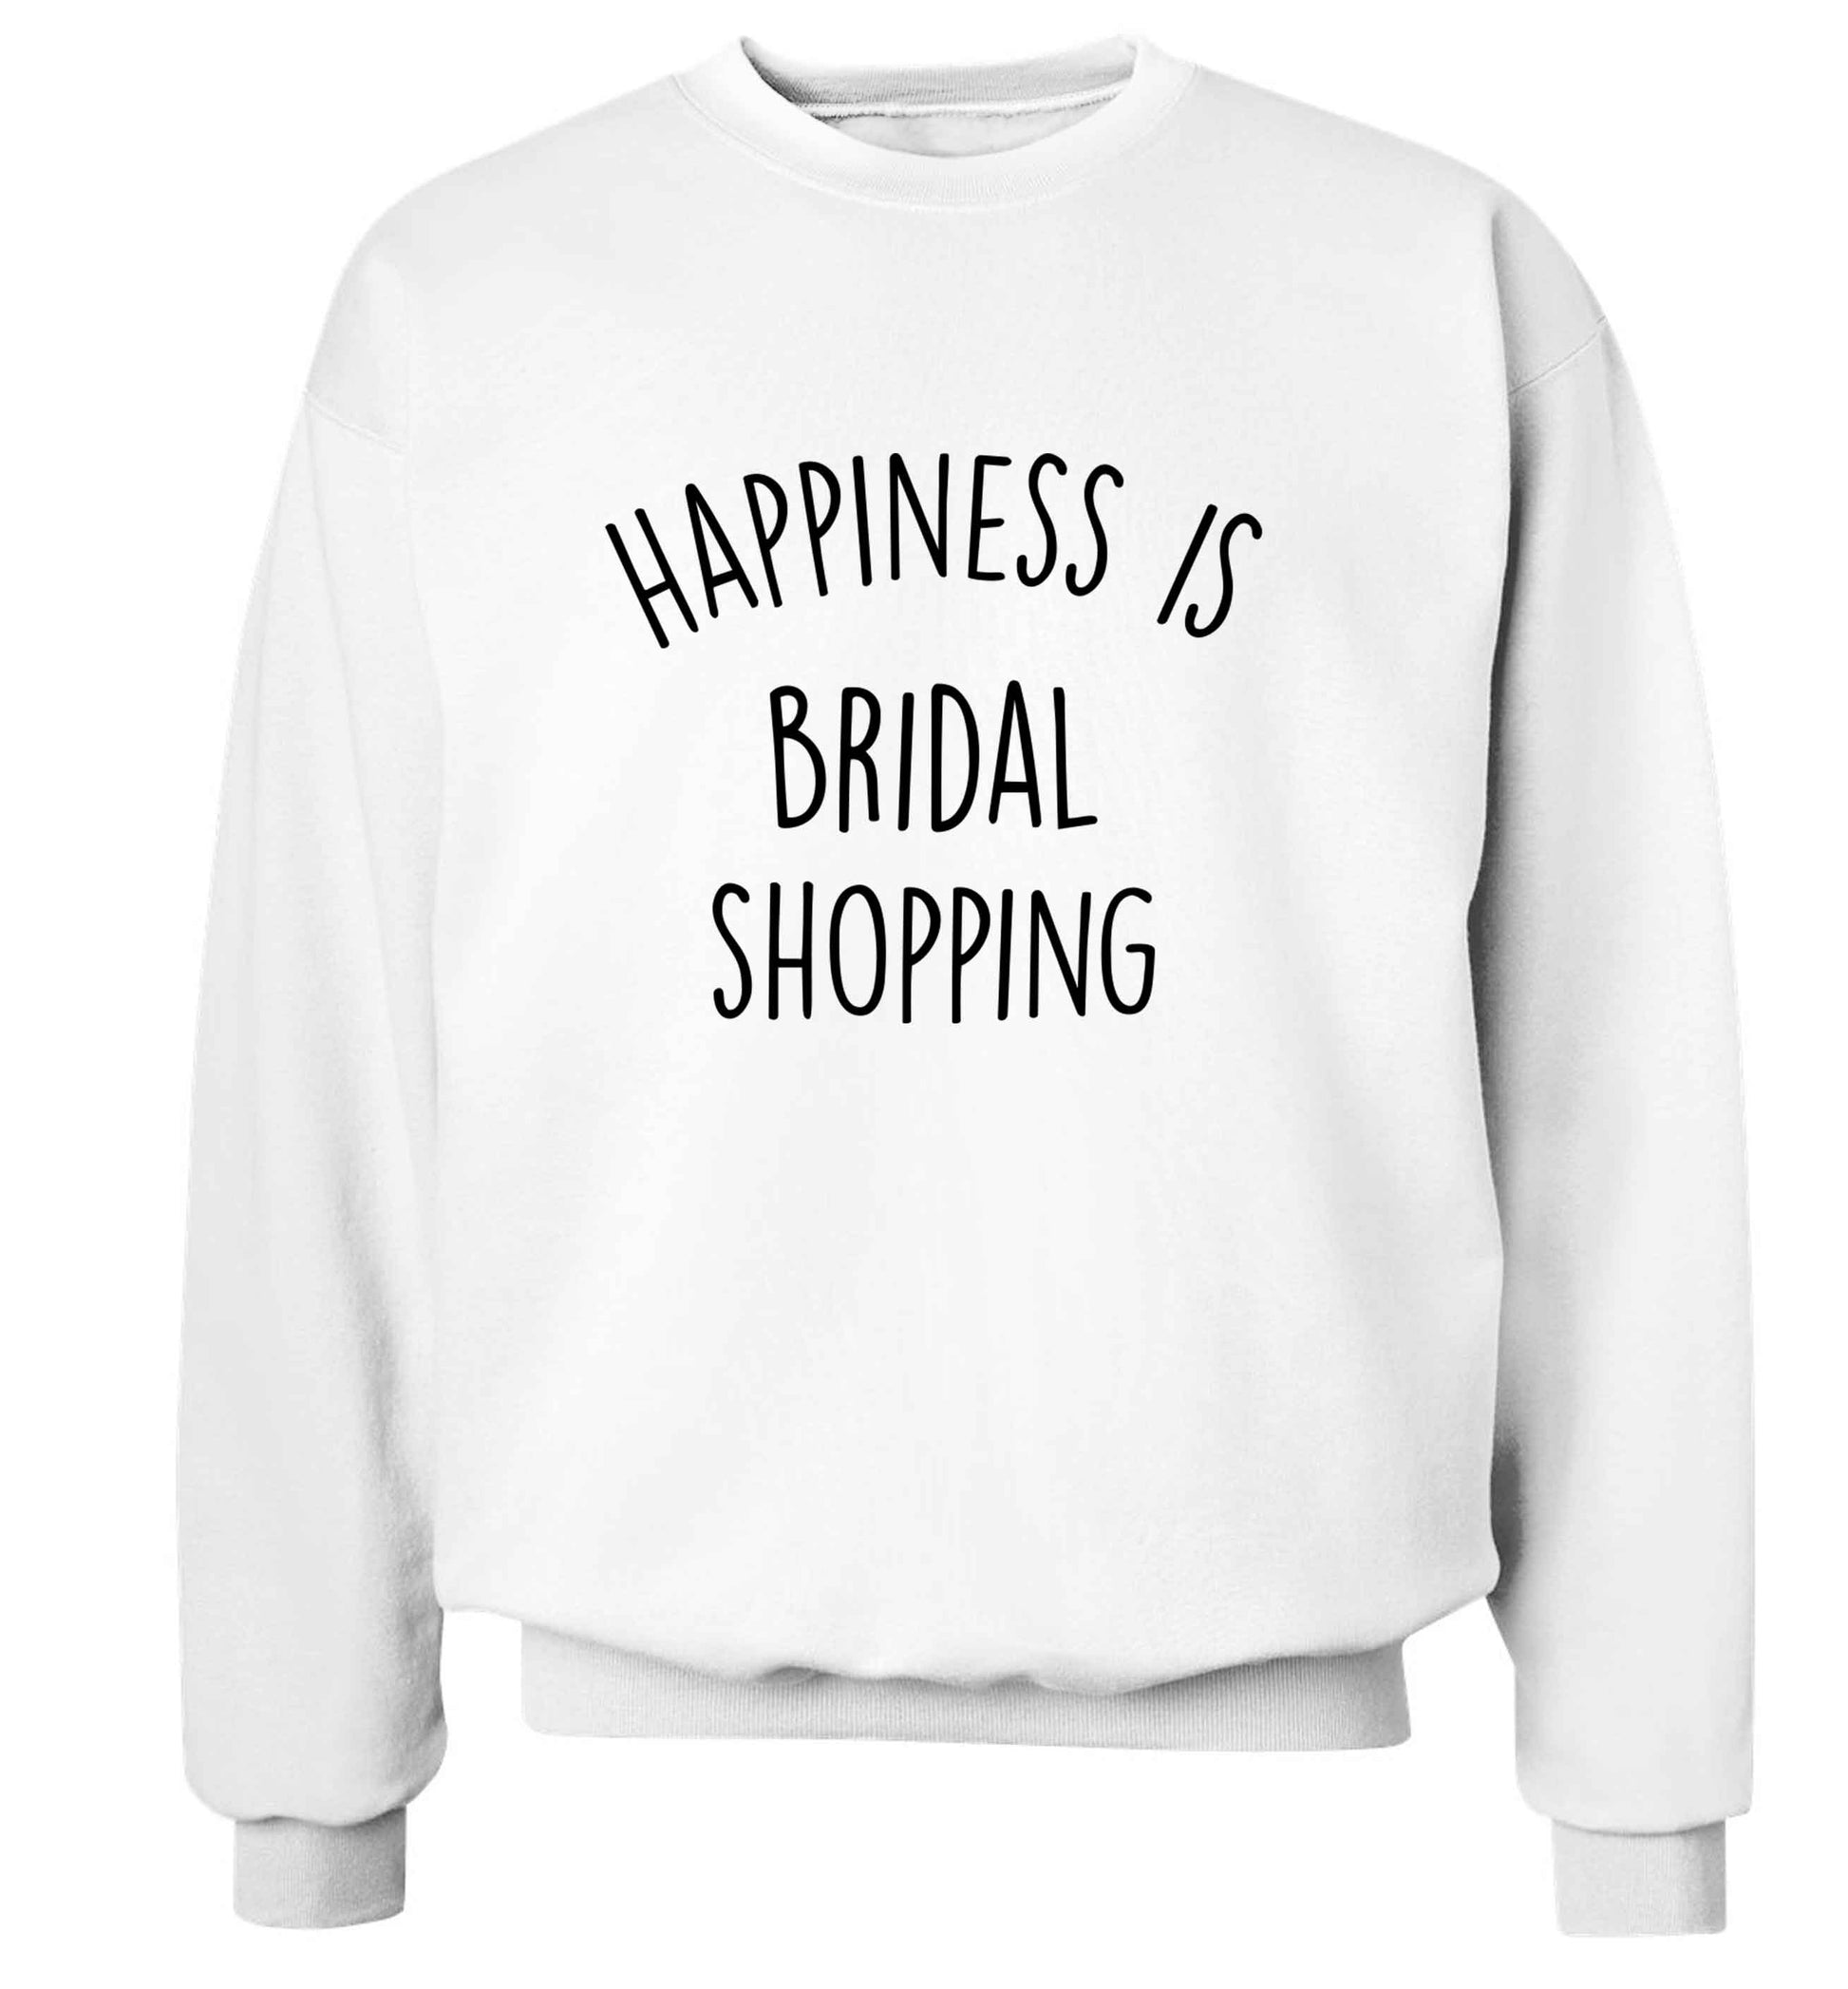 Happiness is bridal shopping adult's unisex white sweater 2XL